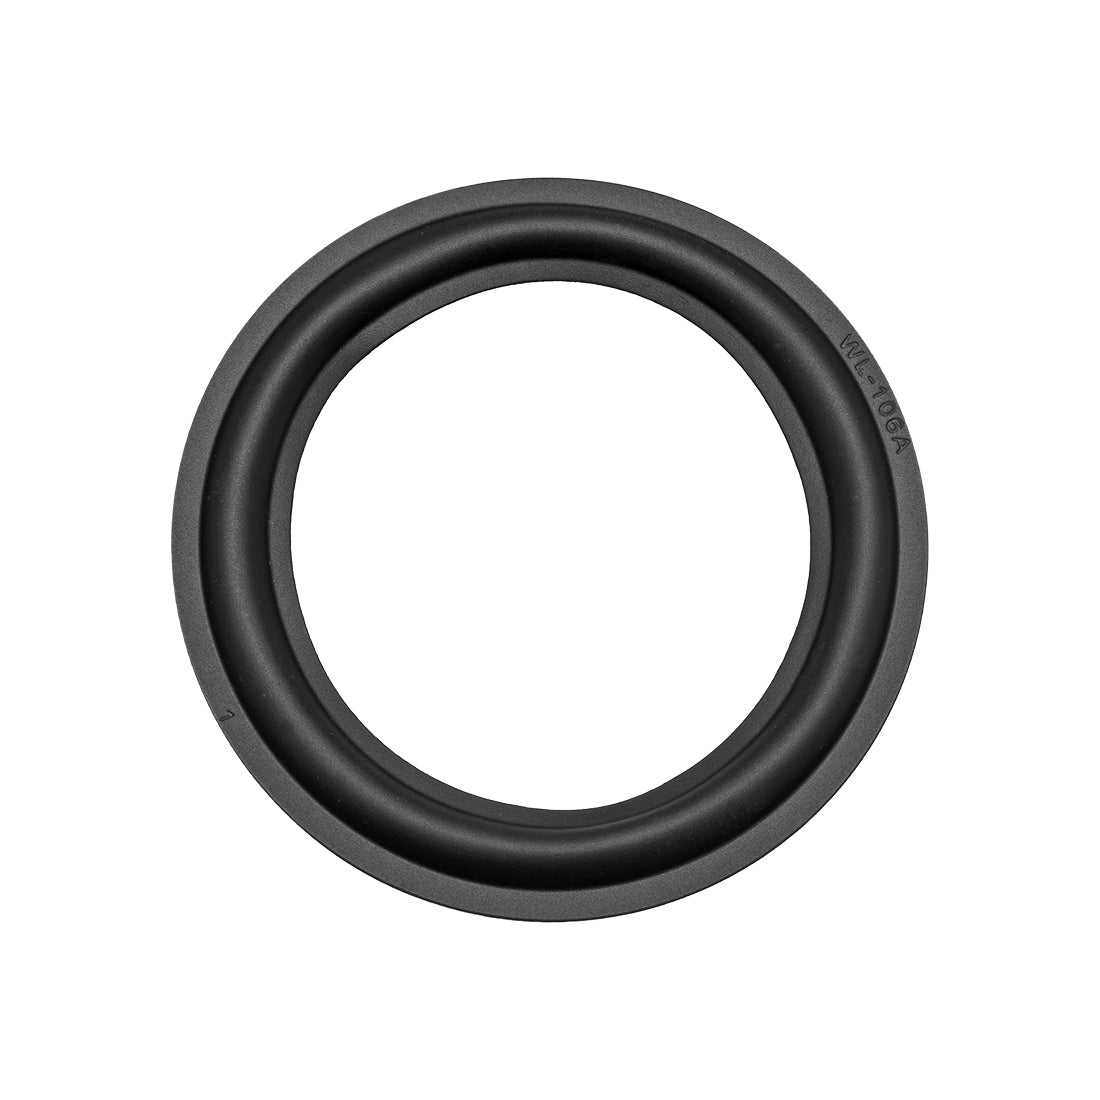 uxcell Uxcell 4.5 inch Speaker Rubber Edge Surround Rings Replacement Parts for Speaker Repair or DIY